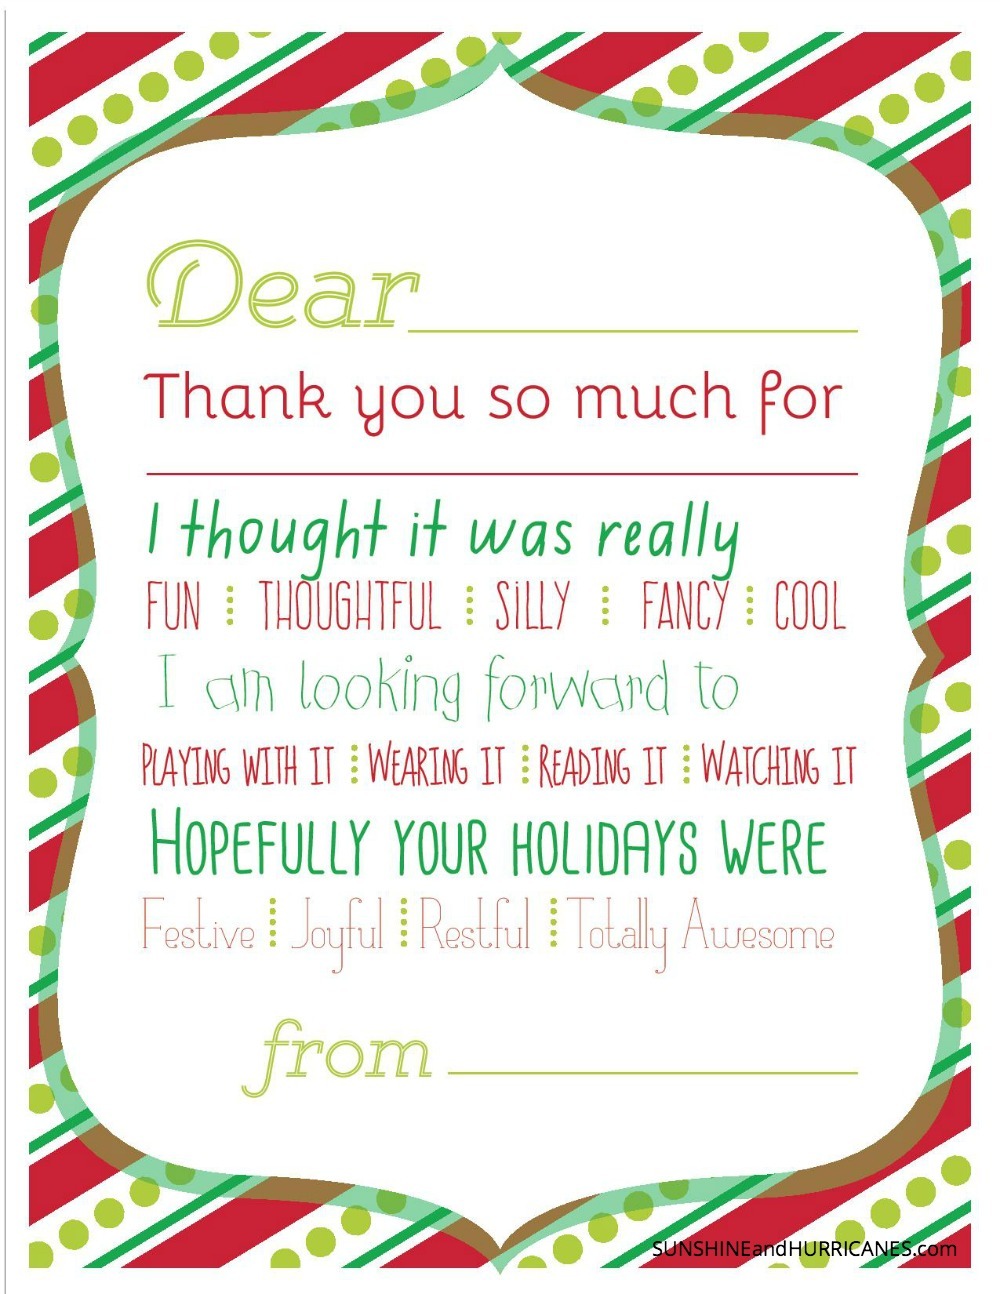 christmas thank you pictures